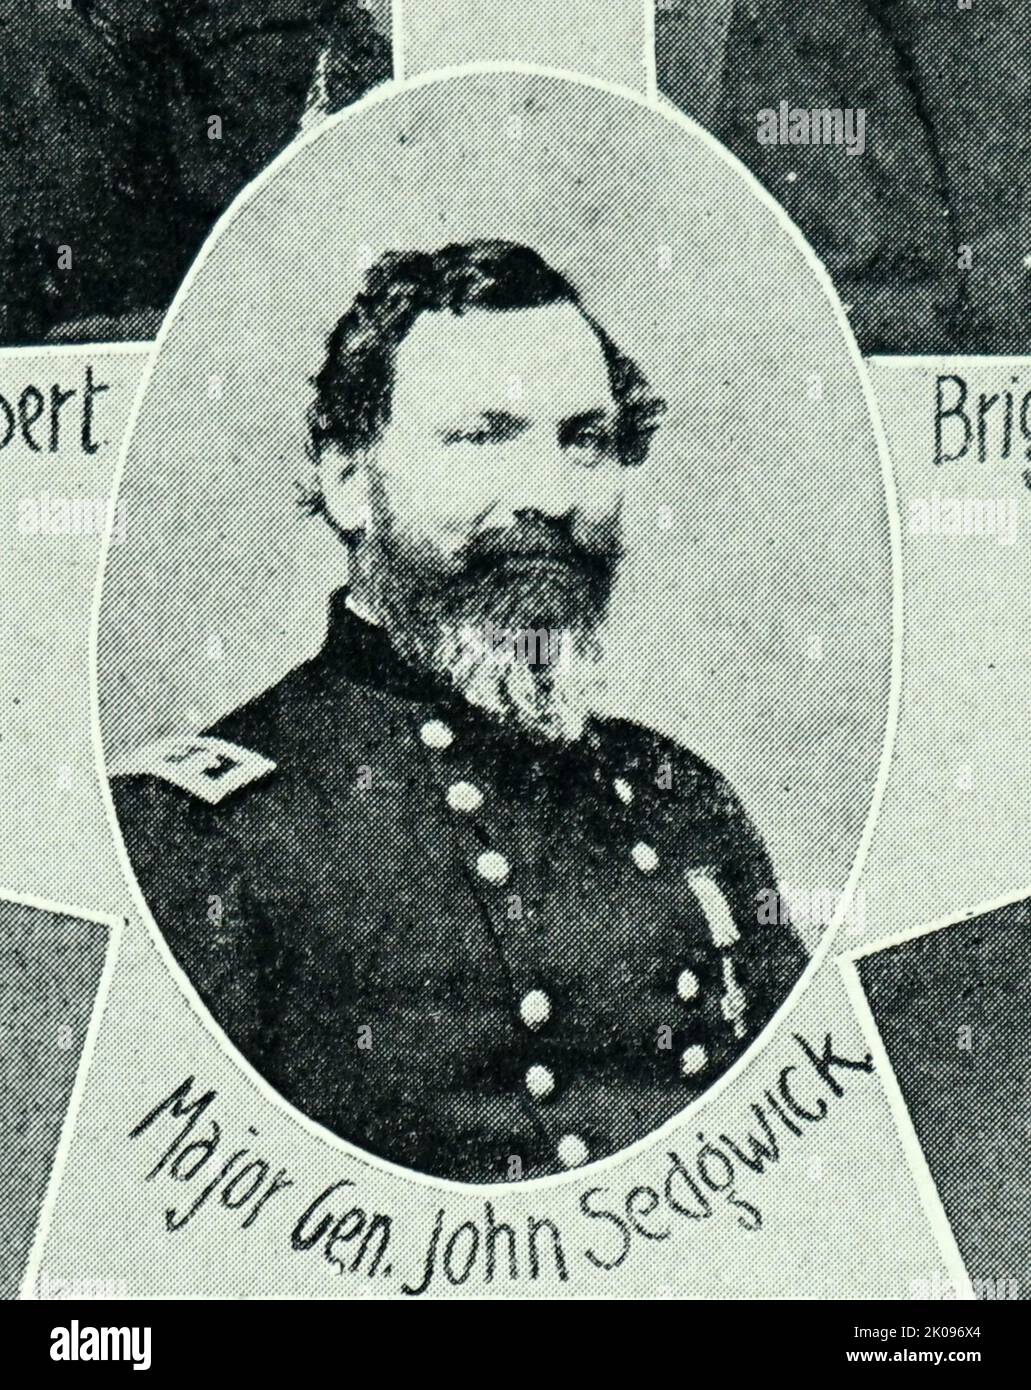 Brigadier General John Sedgwick. John Sedgwick (September 13, 1813 - May 9, 1864) was a military officer and Union Army general during the American Civil War. He was wounded three times at the Battle of Antietam while leading his division in an unsuccessful assault against Confederate forces, causing him to miss the Battle of Fredericksburg. Sedgwick was killed by a sharpshooter at the Battle of Spotsylvania Court House on May 9, 1864. Stock Photo